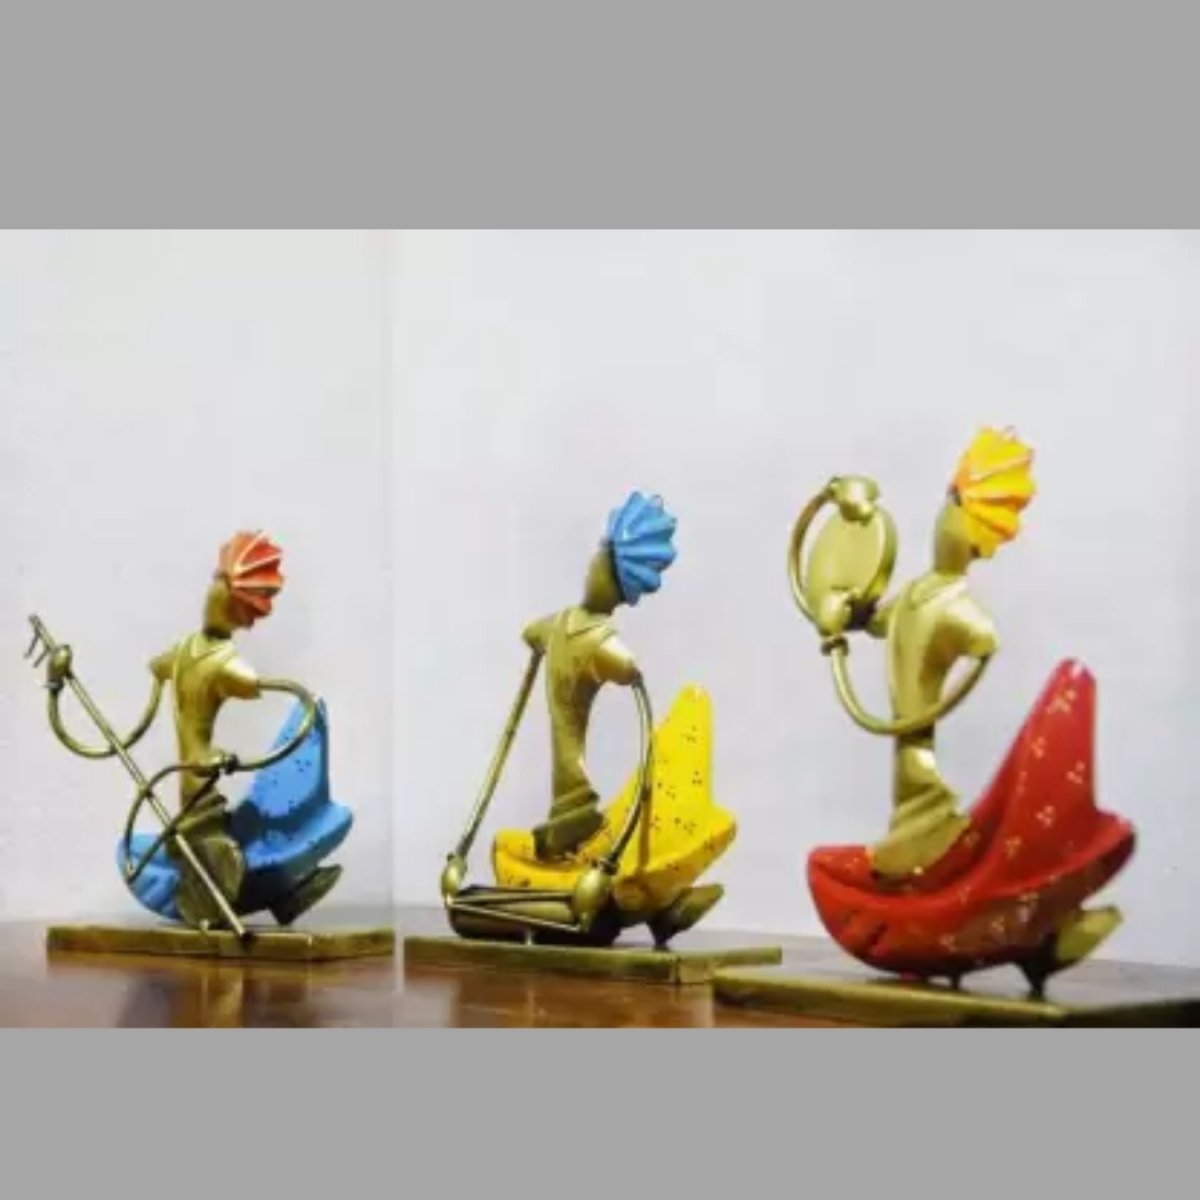 Metallic Colorful Rajasthani Musicians For living room (8.5*6.5*9 Inches approx)